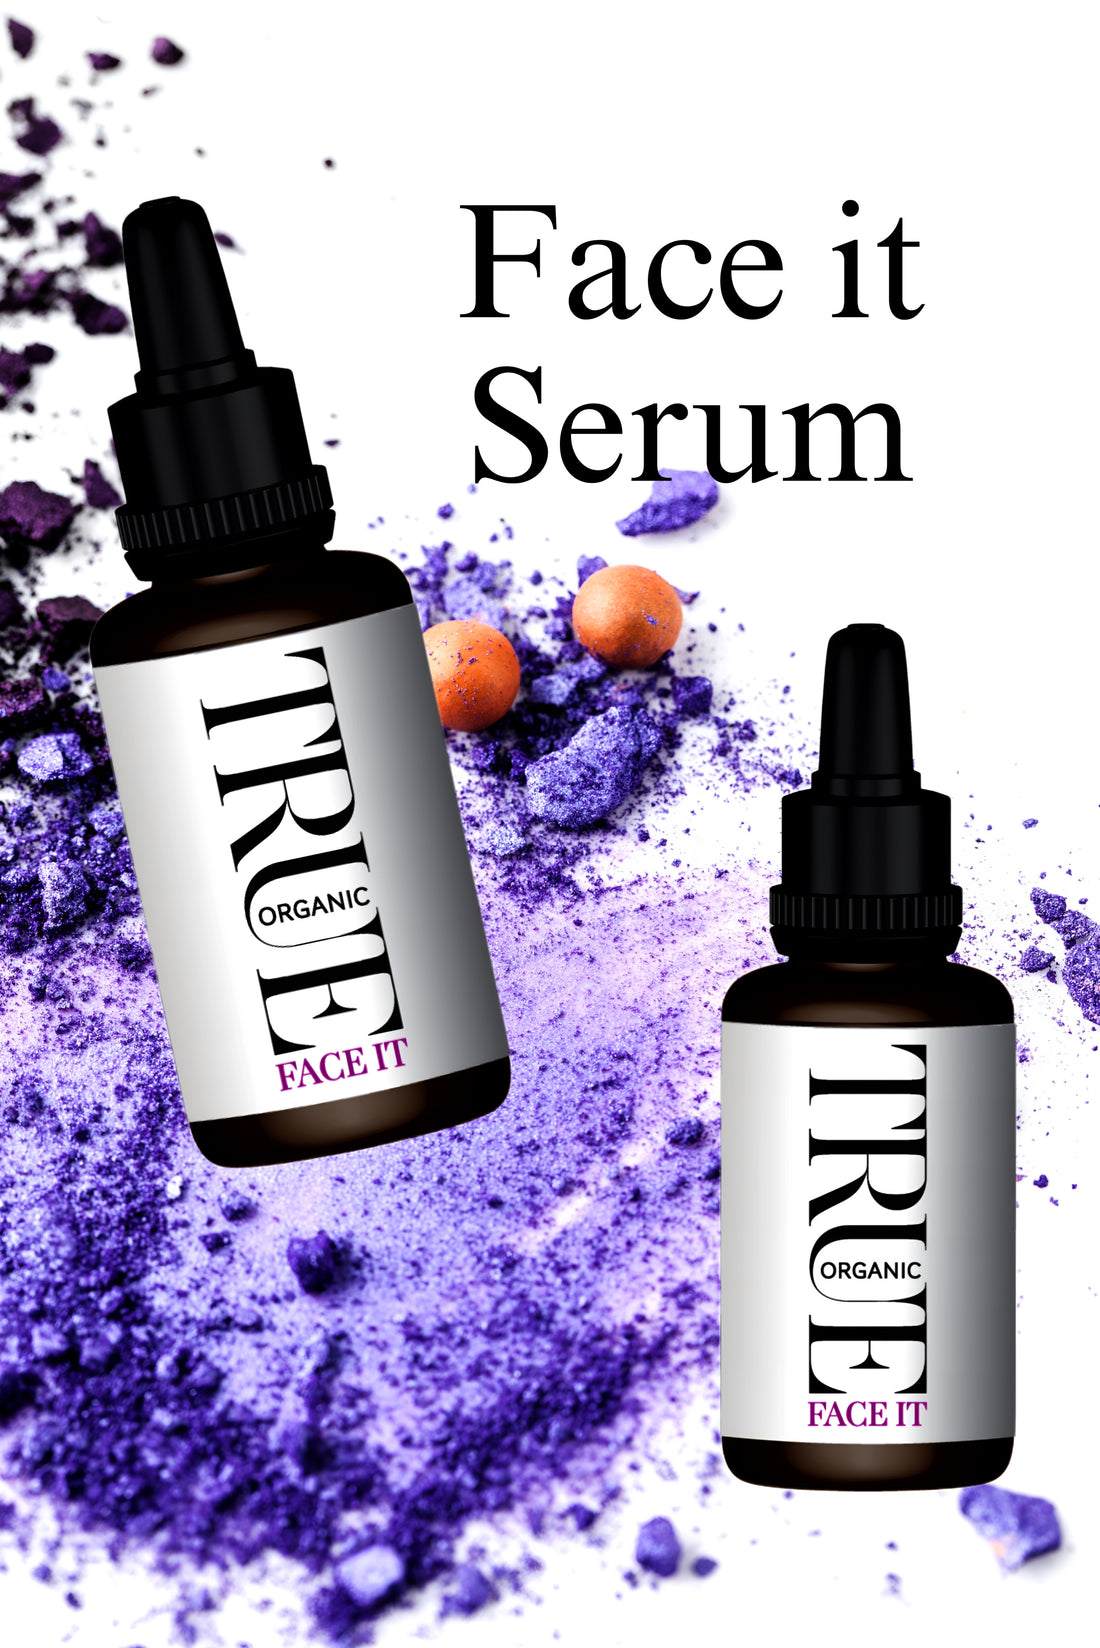 The Natural Way to Glow: How Face It Serum by True organic of Sweden Gives You a Beautiful Radiance